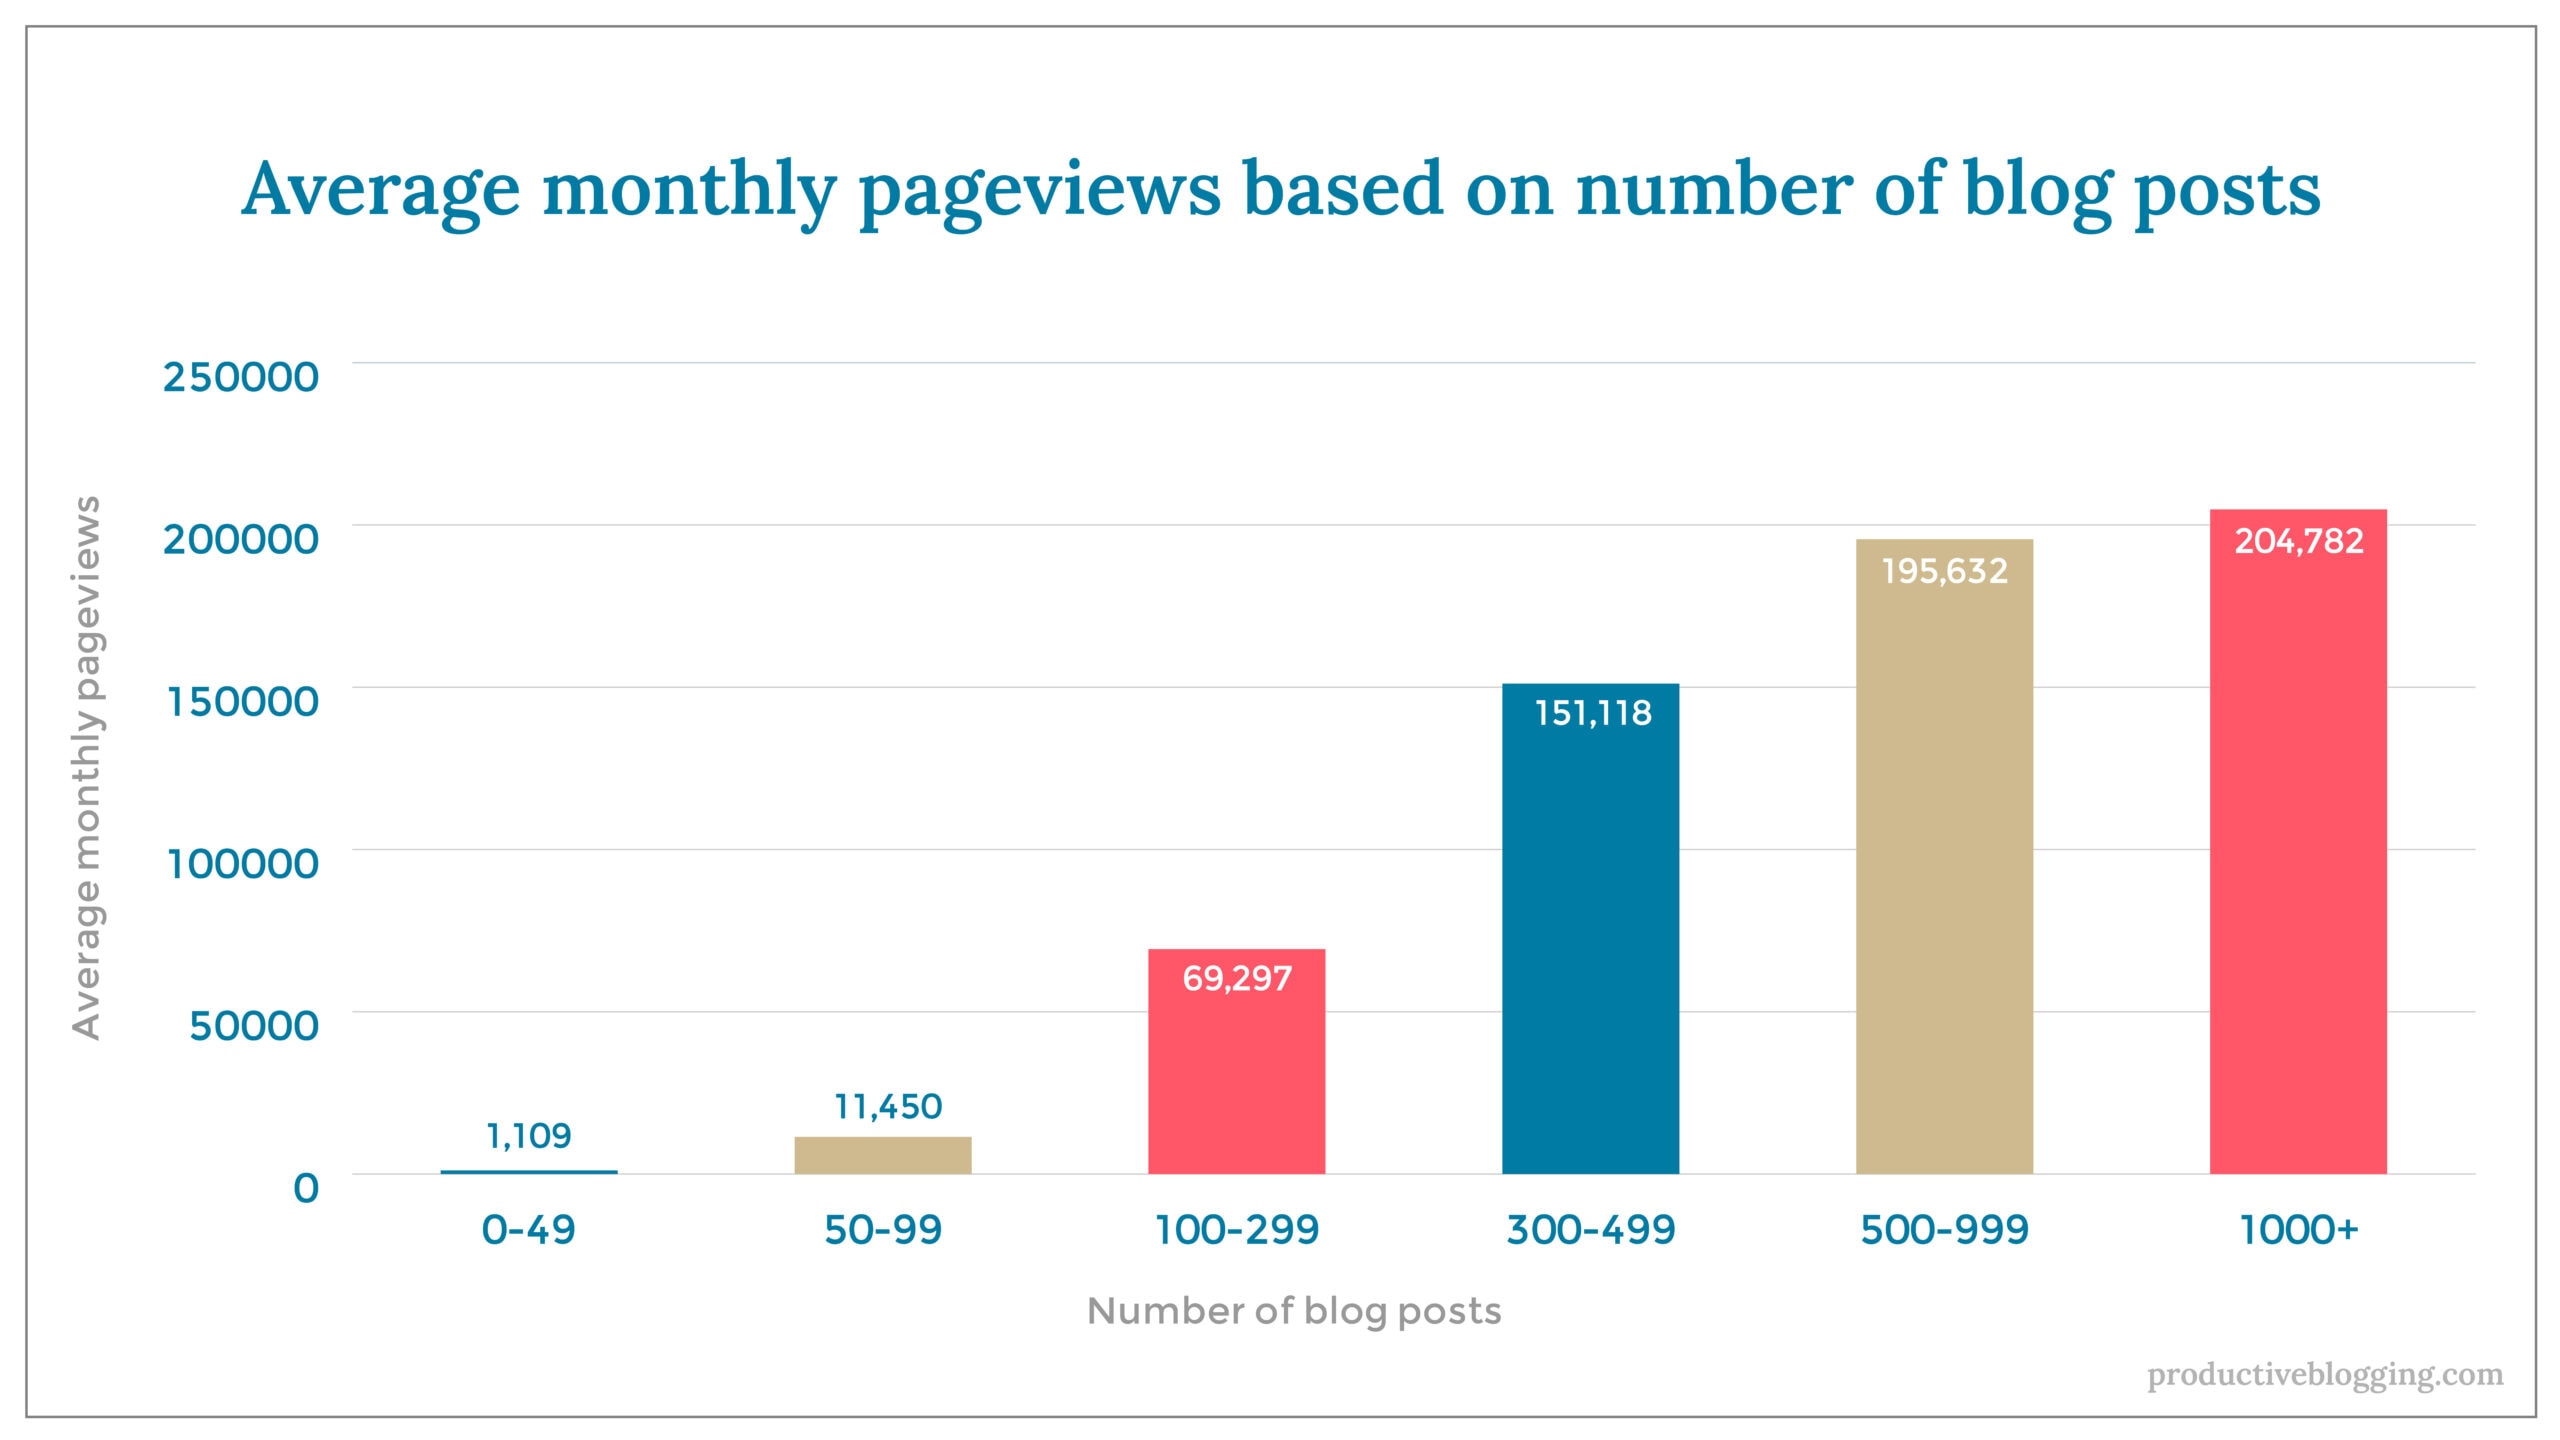 Average monthly pageviews based on number of blog postsX axis: Number of blog postsY axis: Average monthly pageviews0-49 		1,10950-99		11,450100-299	69,297300-499	151,118500-999	195,6321000+		204,782